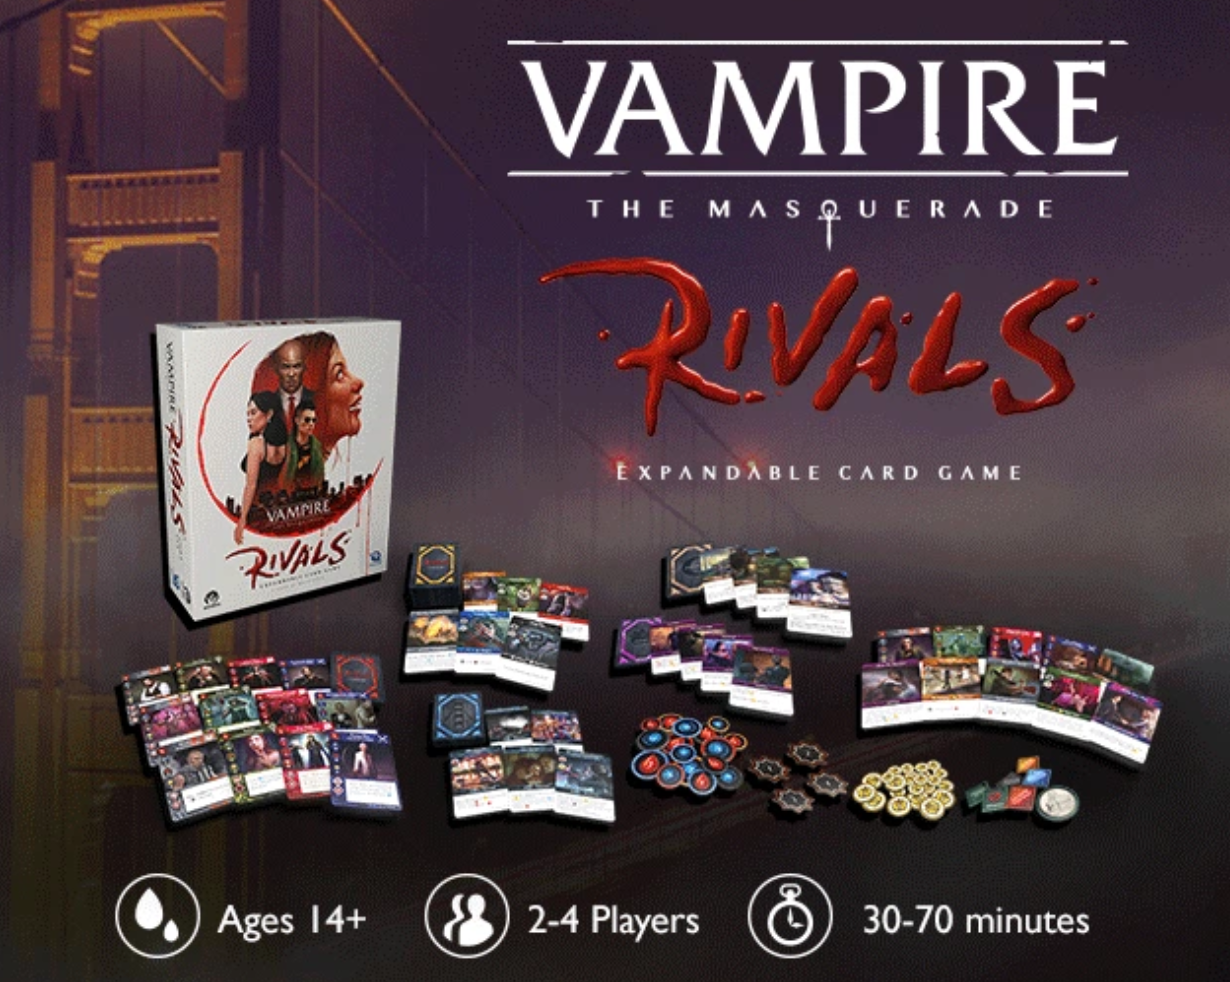 Vampire: The Masquerade Rivals Card Game Announces New Expansion